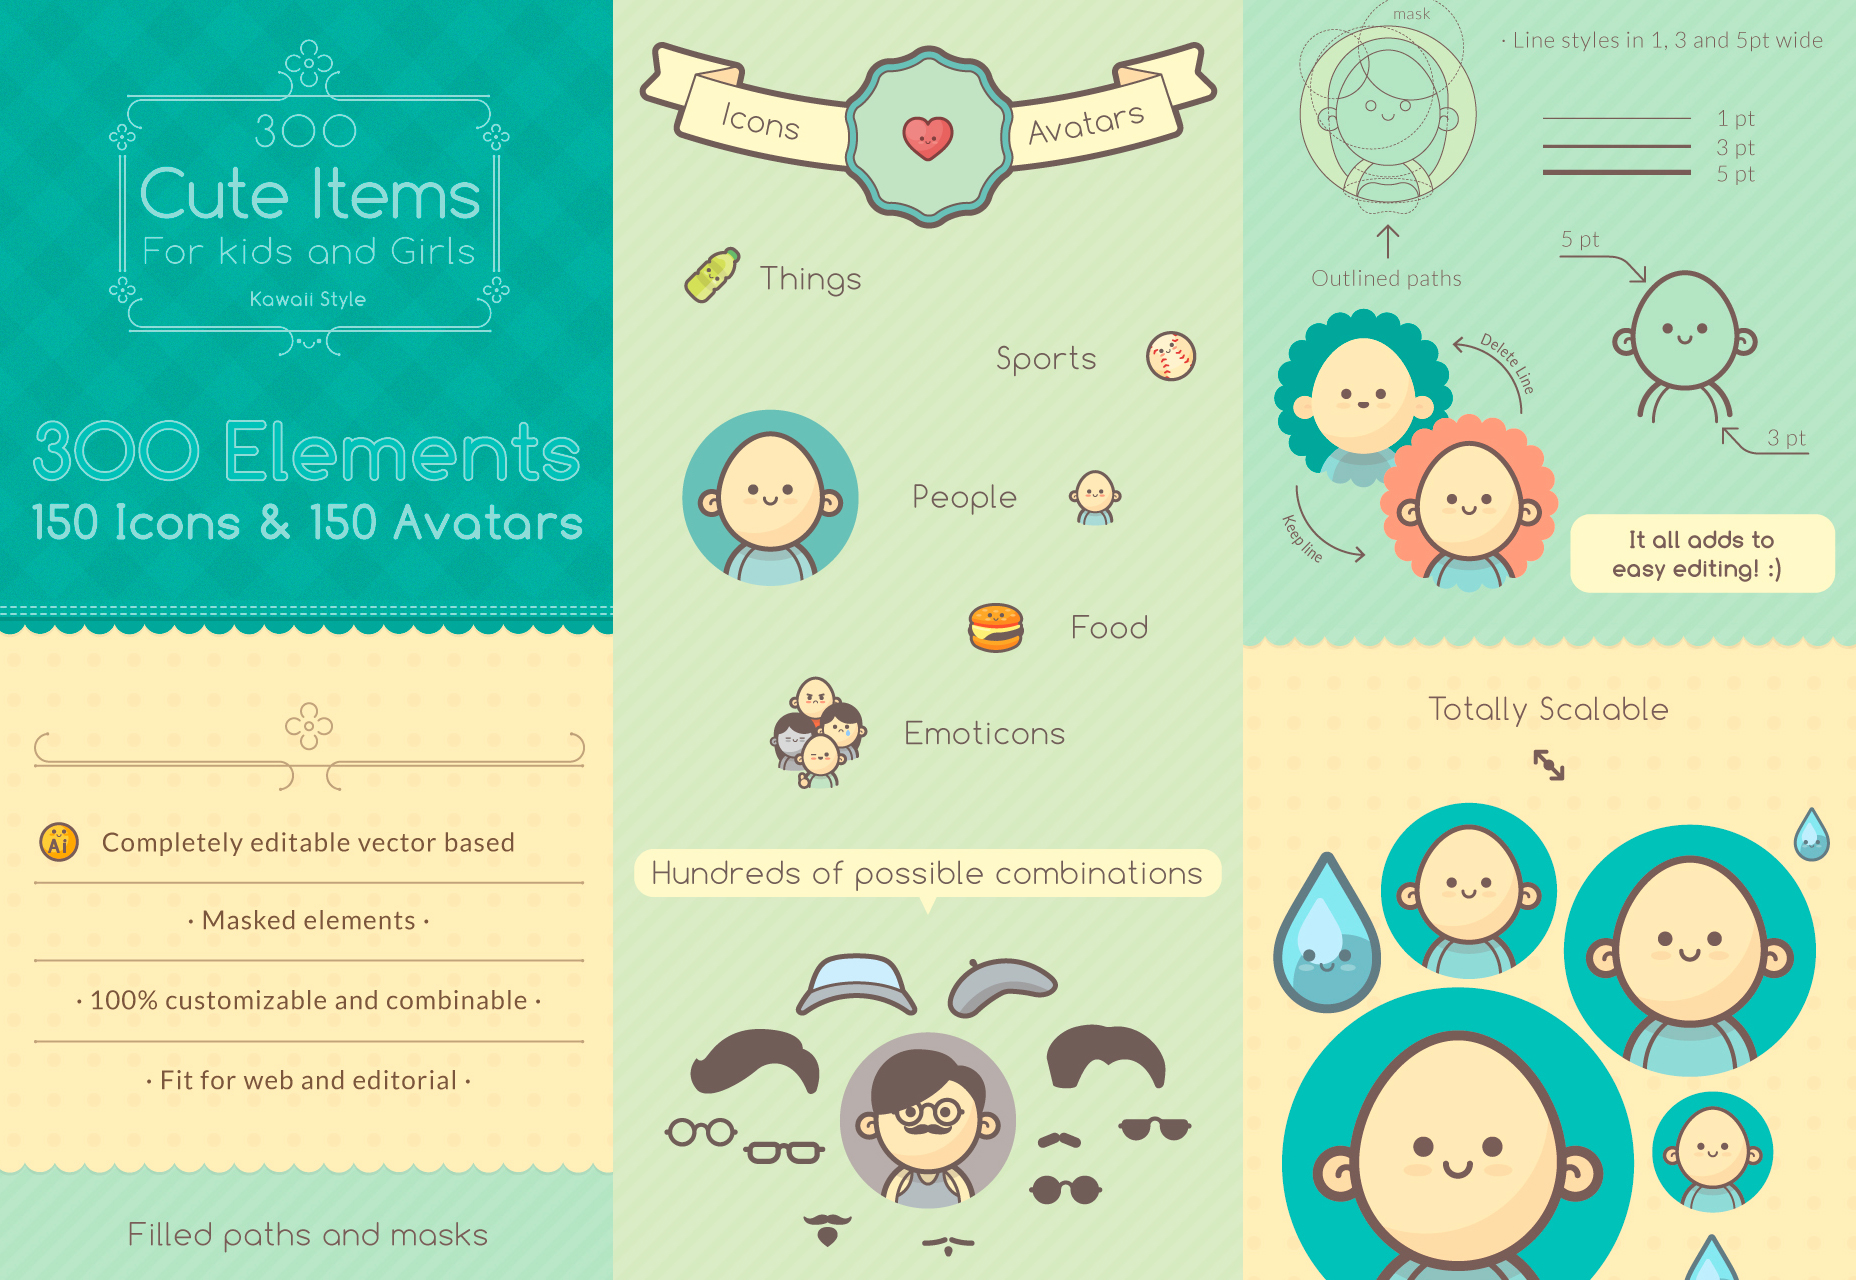 300 Cute Icons and Avatars in Kawaii Style